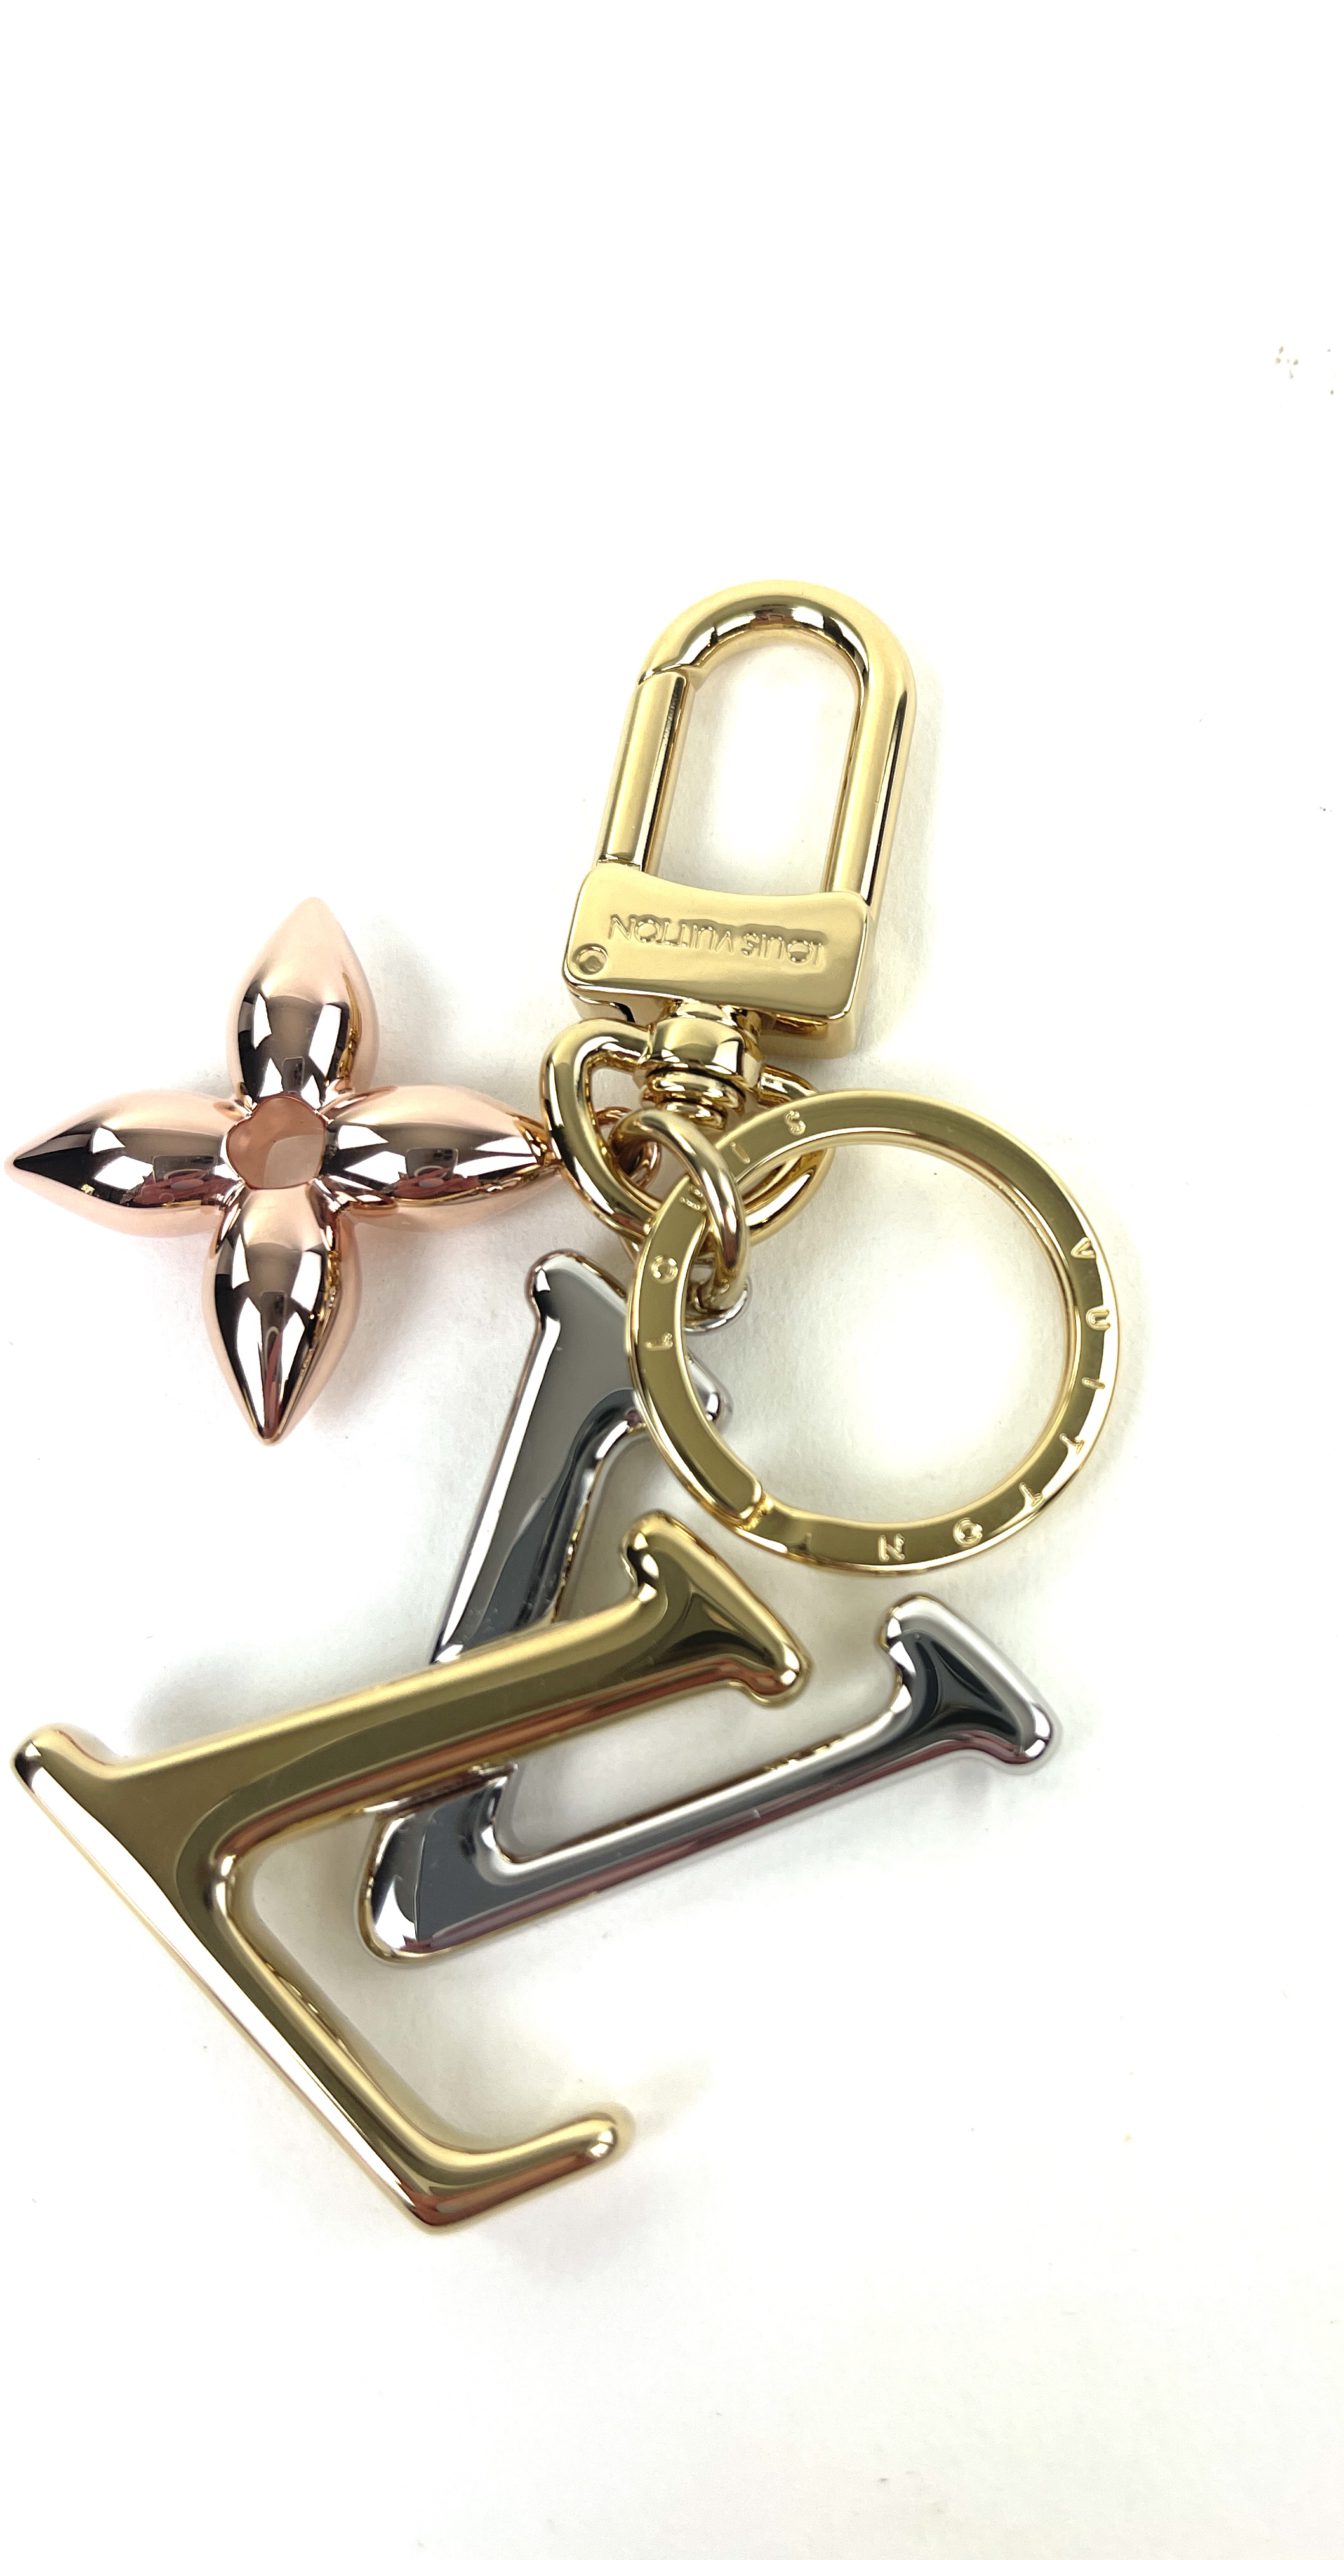 NEW LOUISVUITTON WAVE bag charm and keychain